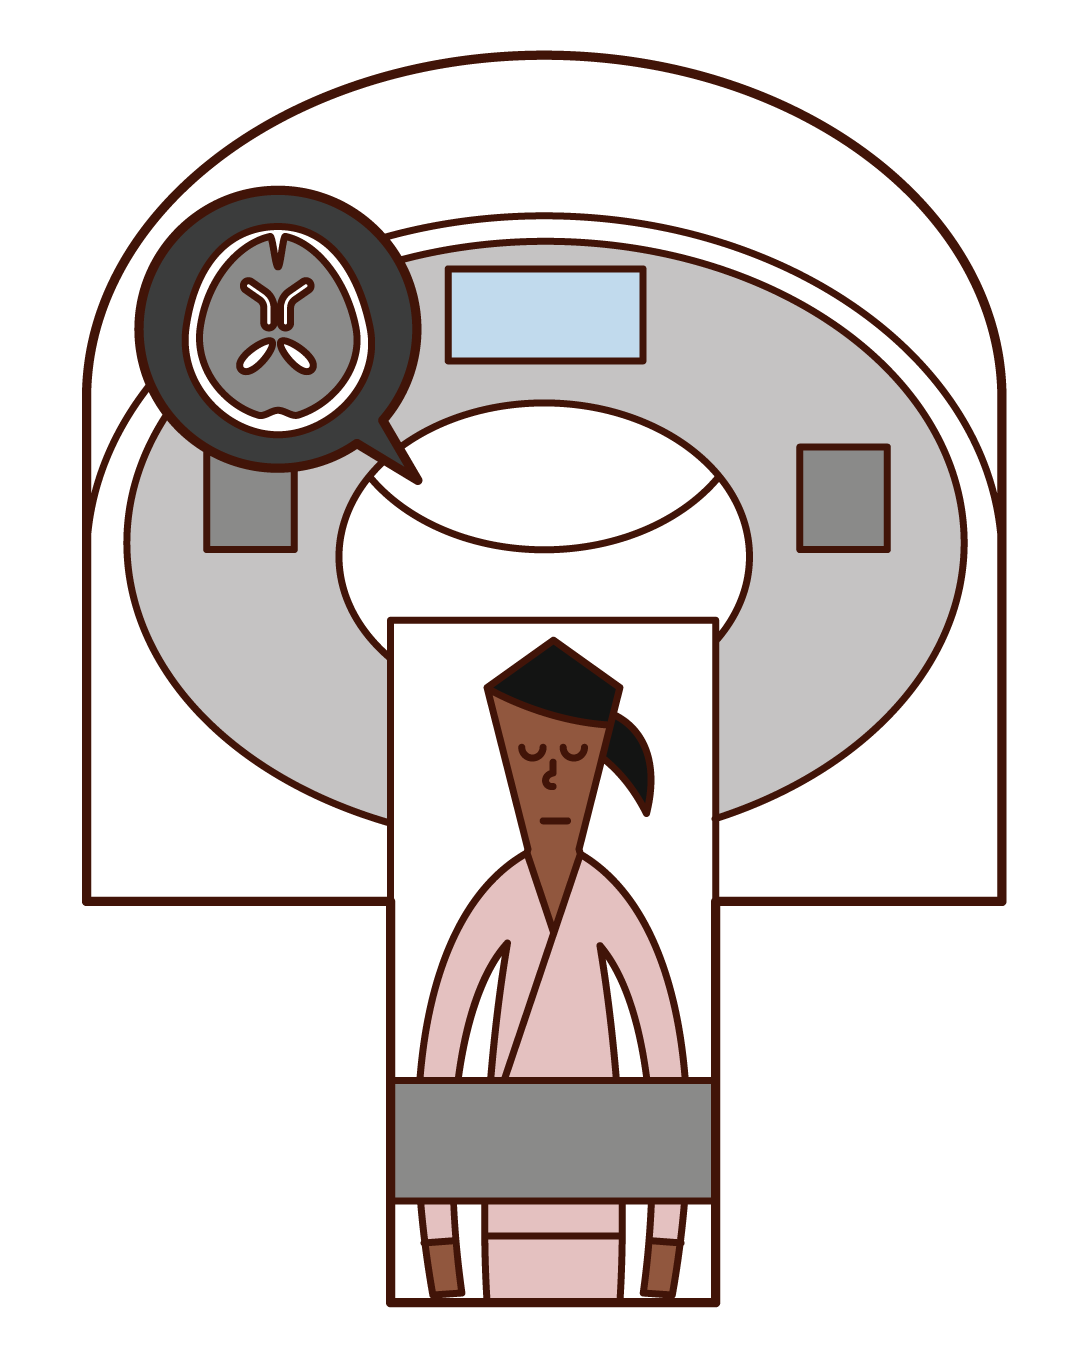 Illustration of a woman undergoing AN MRI and CT examination